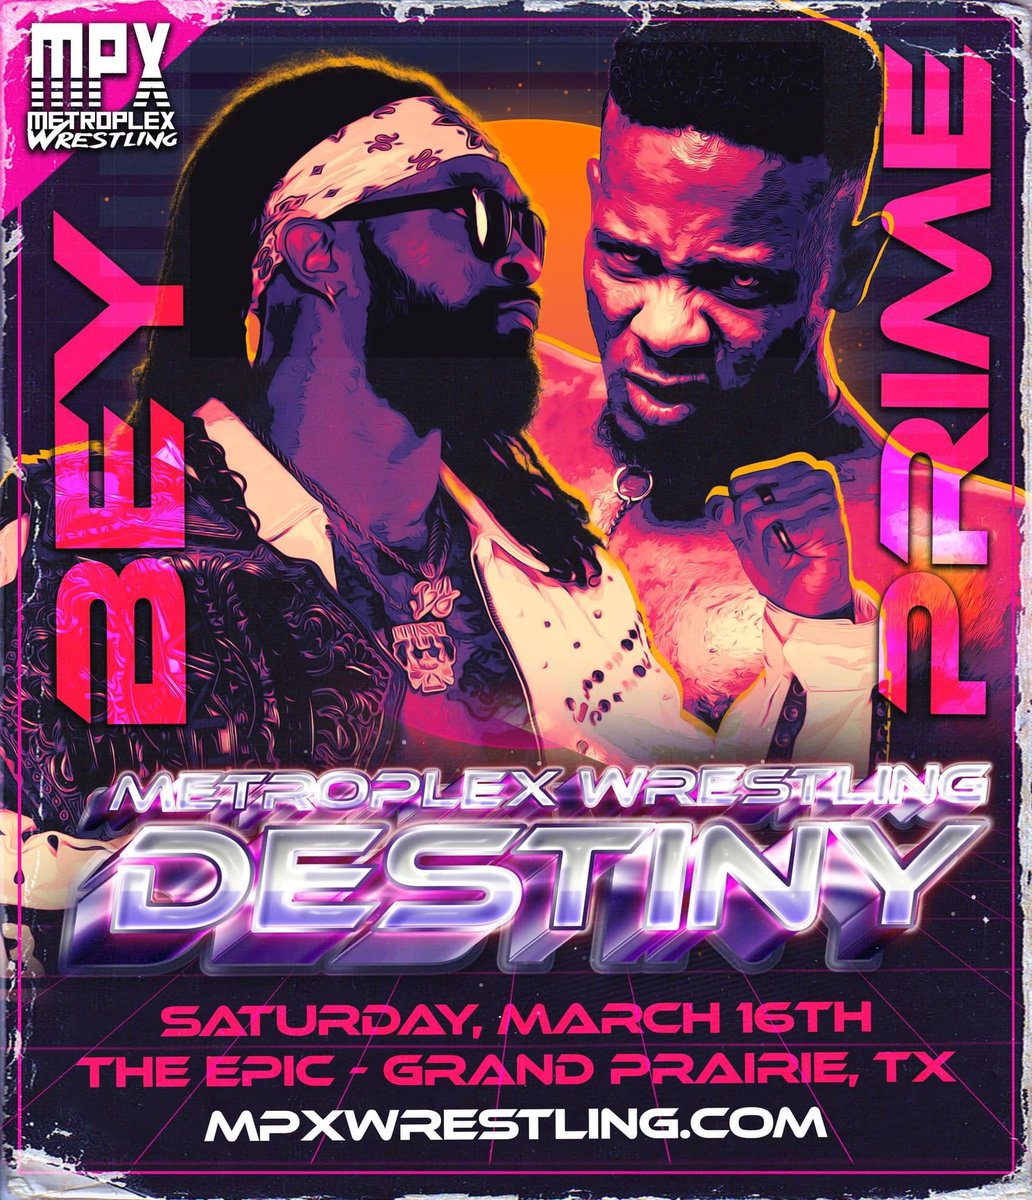 🚨BIGGEST show in @MPXwrestling history!🚨 Chris Bey vs Exodus Prime #MPXDESTINY 3.16.24 @TheEpicGP Grand Prairie, TX 🎟️ MPXWrestling.com Featuring: The Rascalz Fuego Del Sol Tommy Becker Brick Savage Exodus Prime + more! #tna #tnawrestling #aew #wrestling